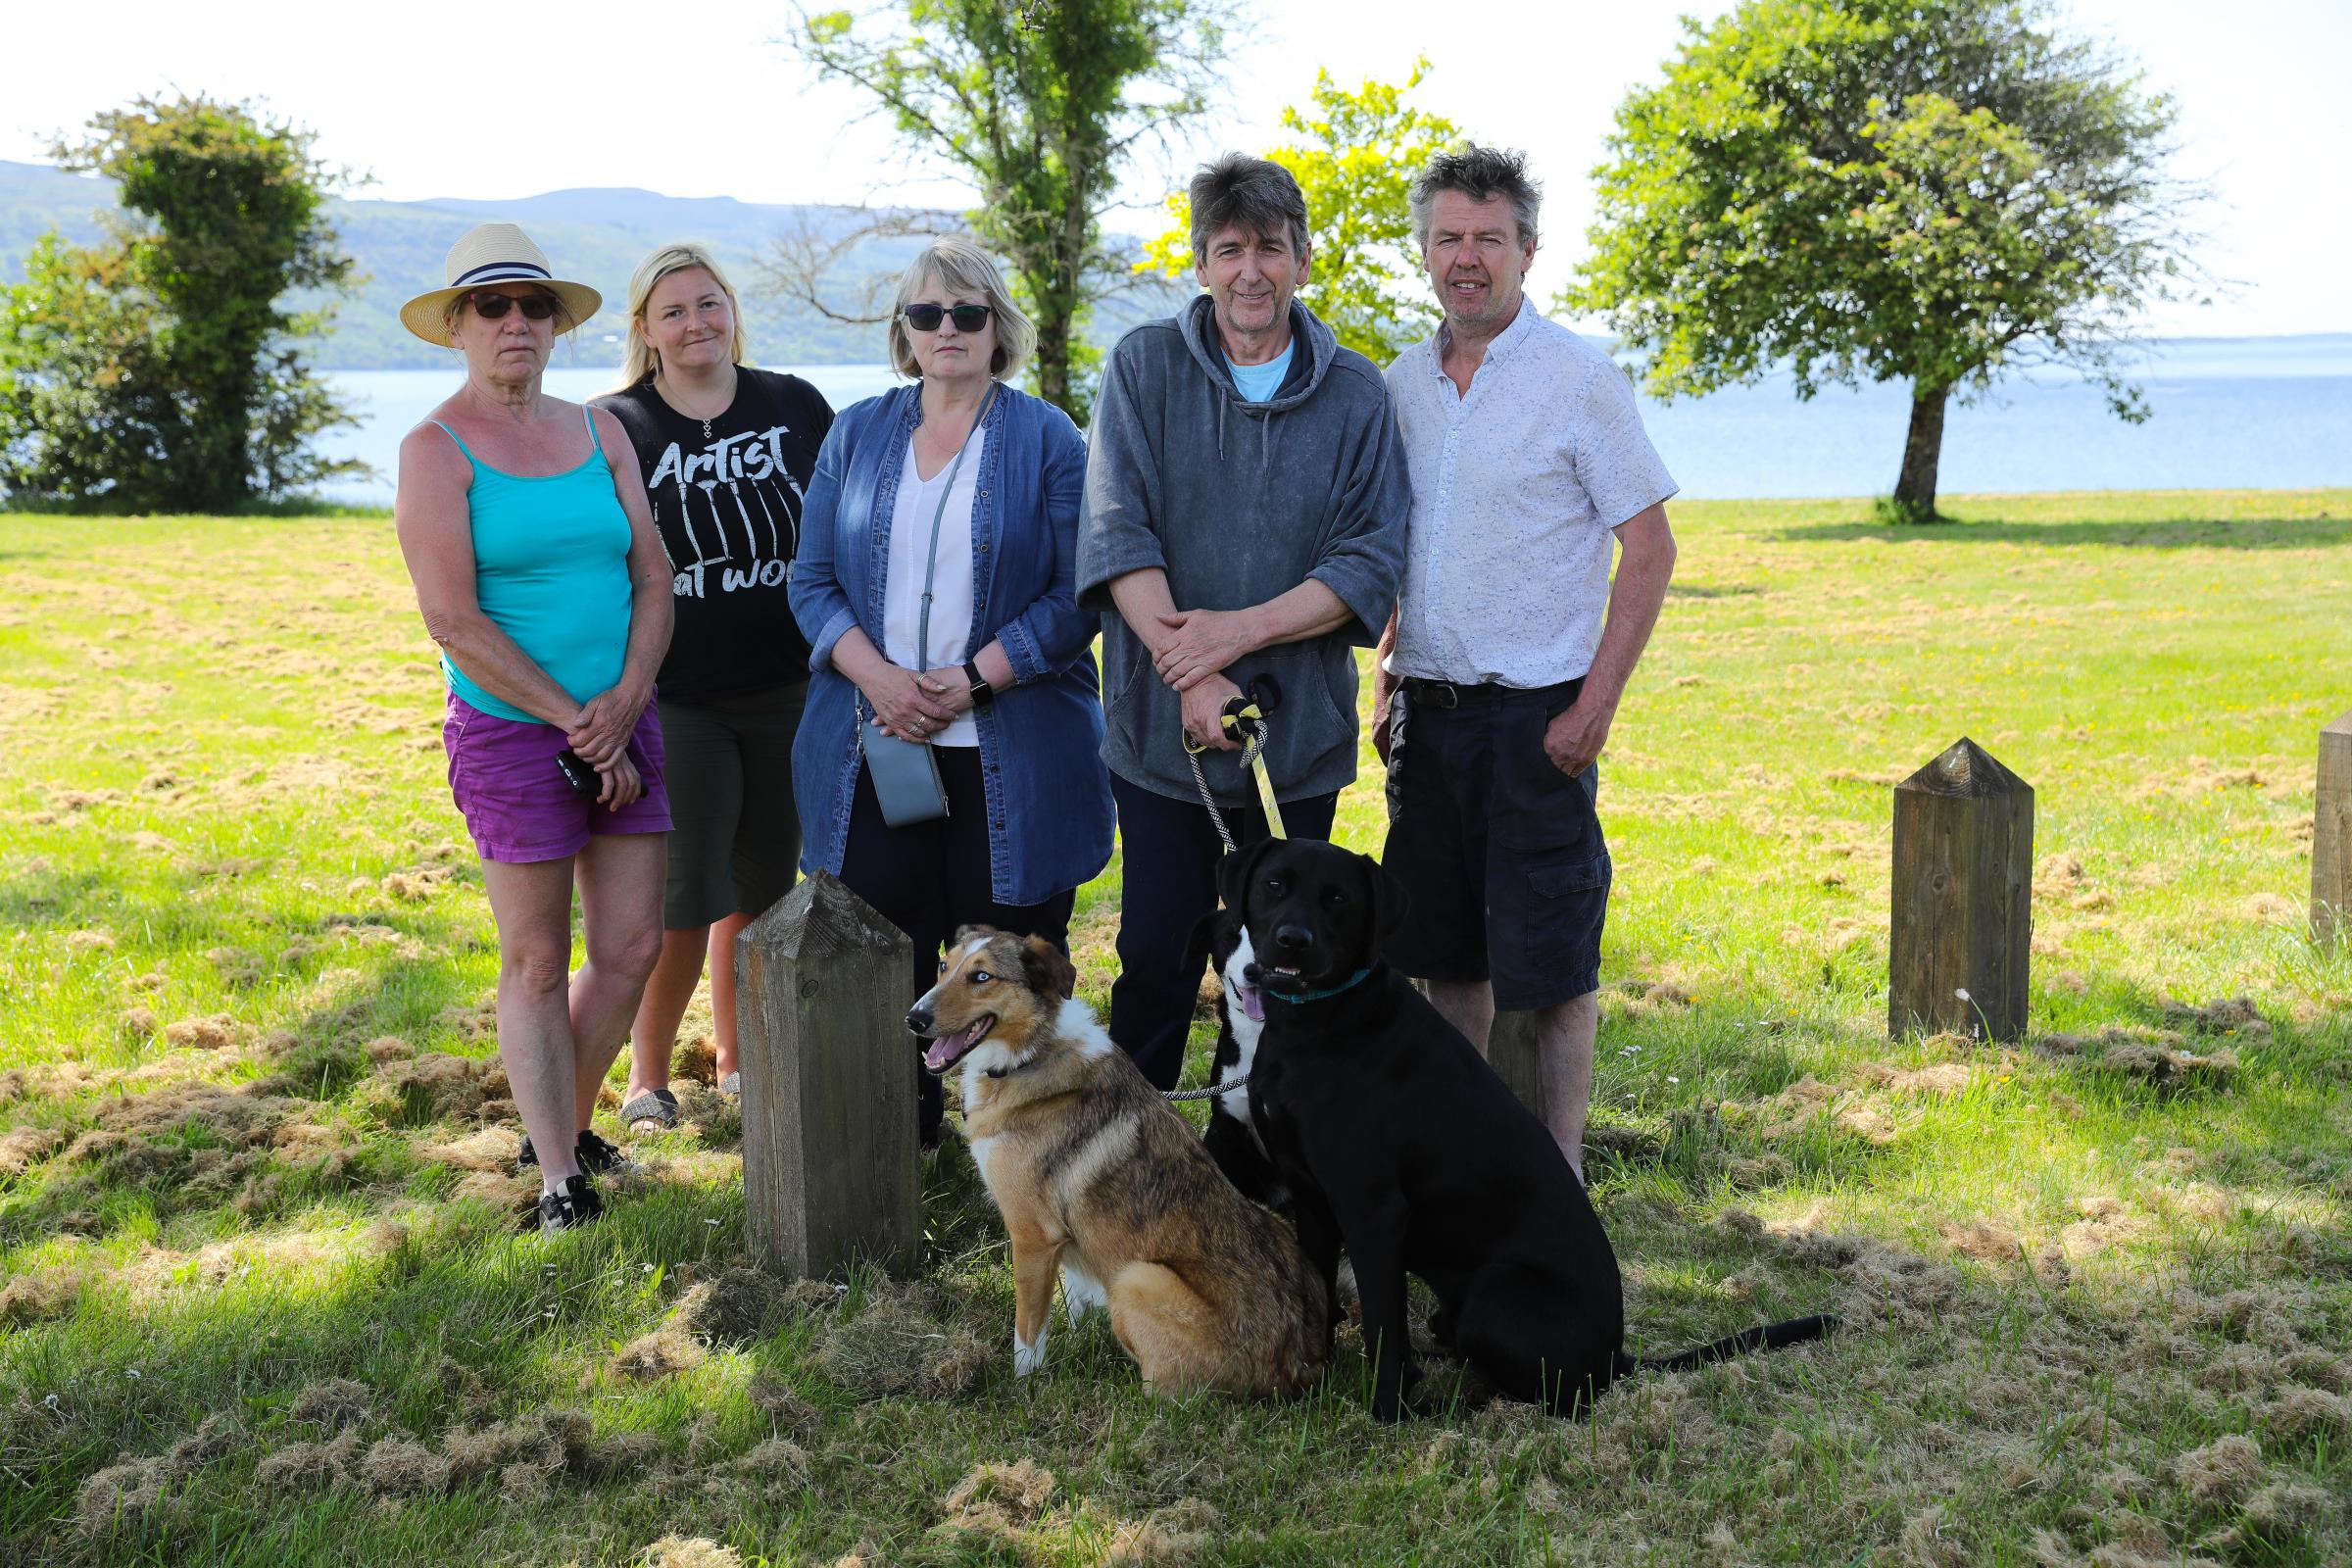 Pictured at Lough Melvin, from left: Amanda Heslop whose dog Mollie died after being on the shoreline Lough Melvin, Michelle Duffy, Alison and David McQuade, who lost their dog Axel, and Sinn Fein Councillor Anthony Feely.